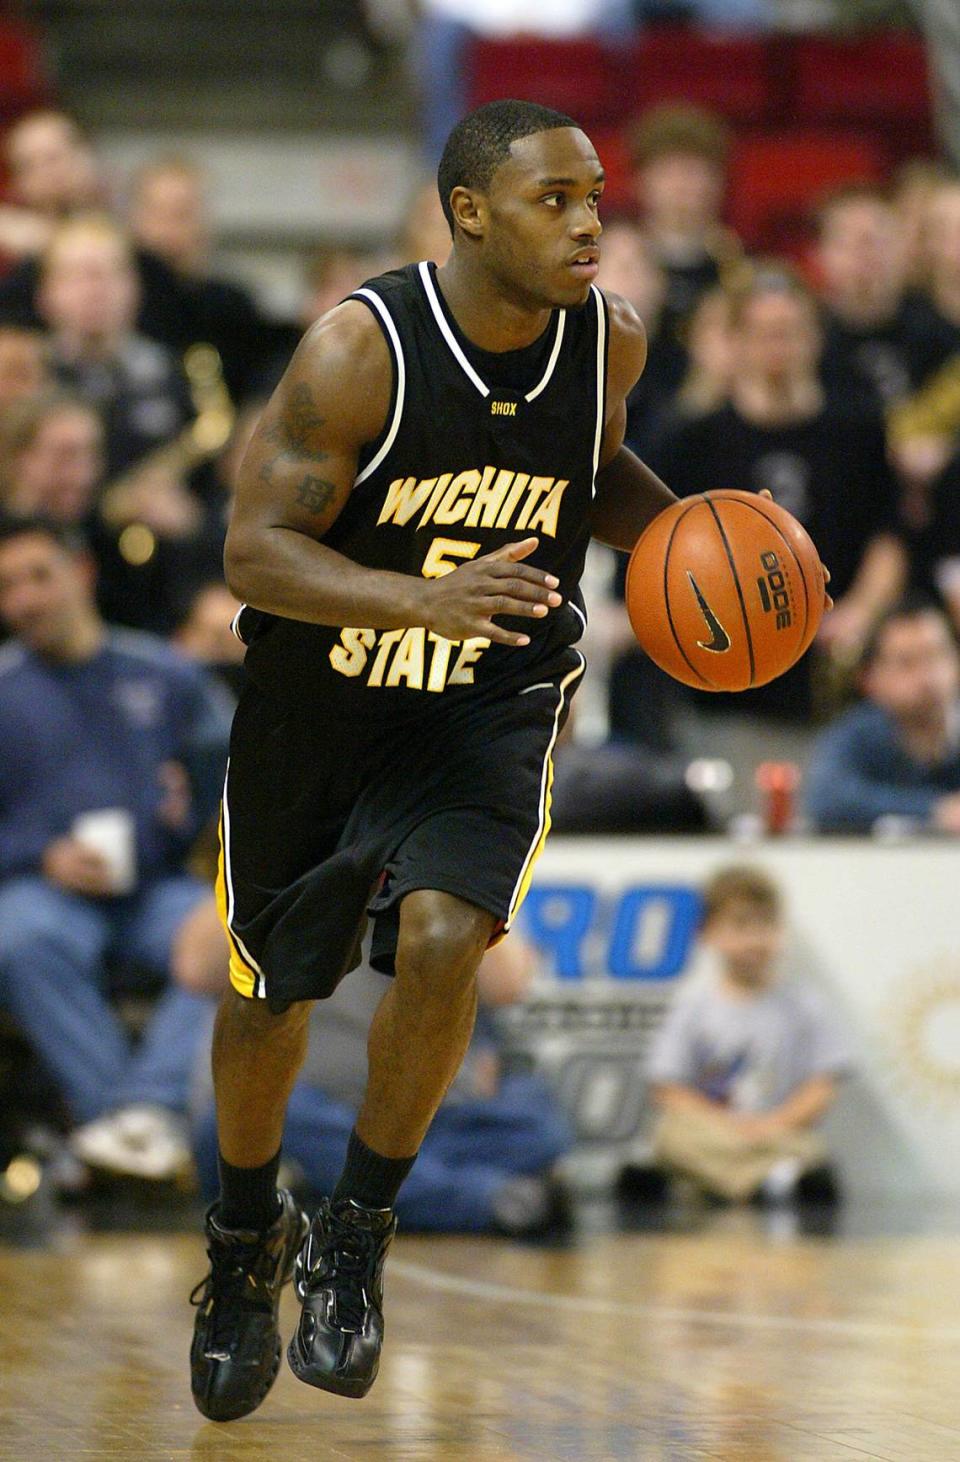 Wichita State guard Randy Burns brings the ball upcourt against Providence, Saturday, Dec. 11, 2004, in Providence, R.I. Burns had 24 points in their 90-86 win. (AP Photo/Stew Milne)